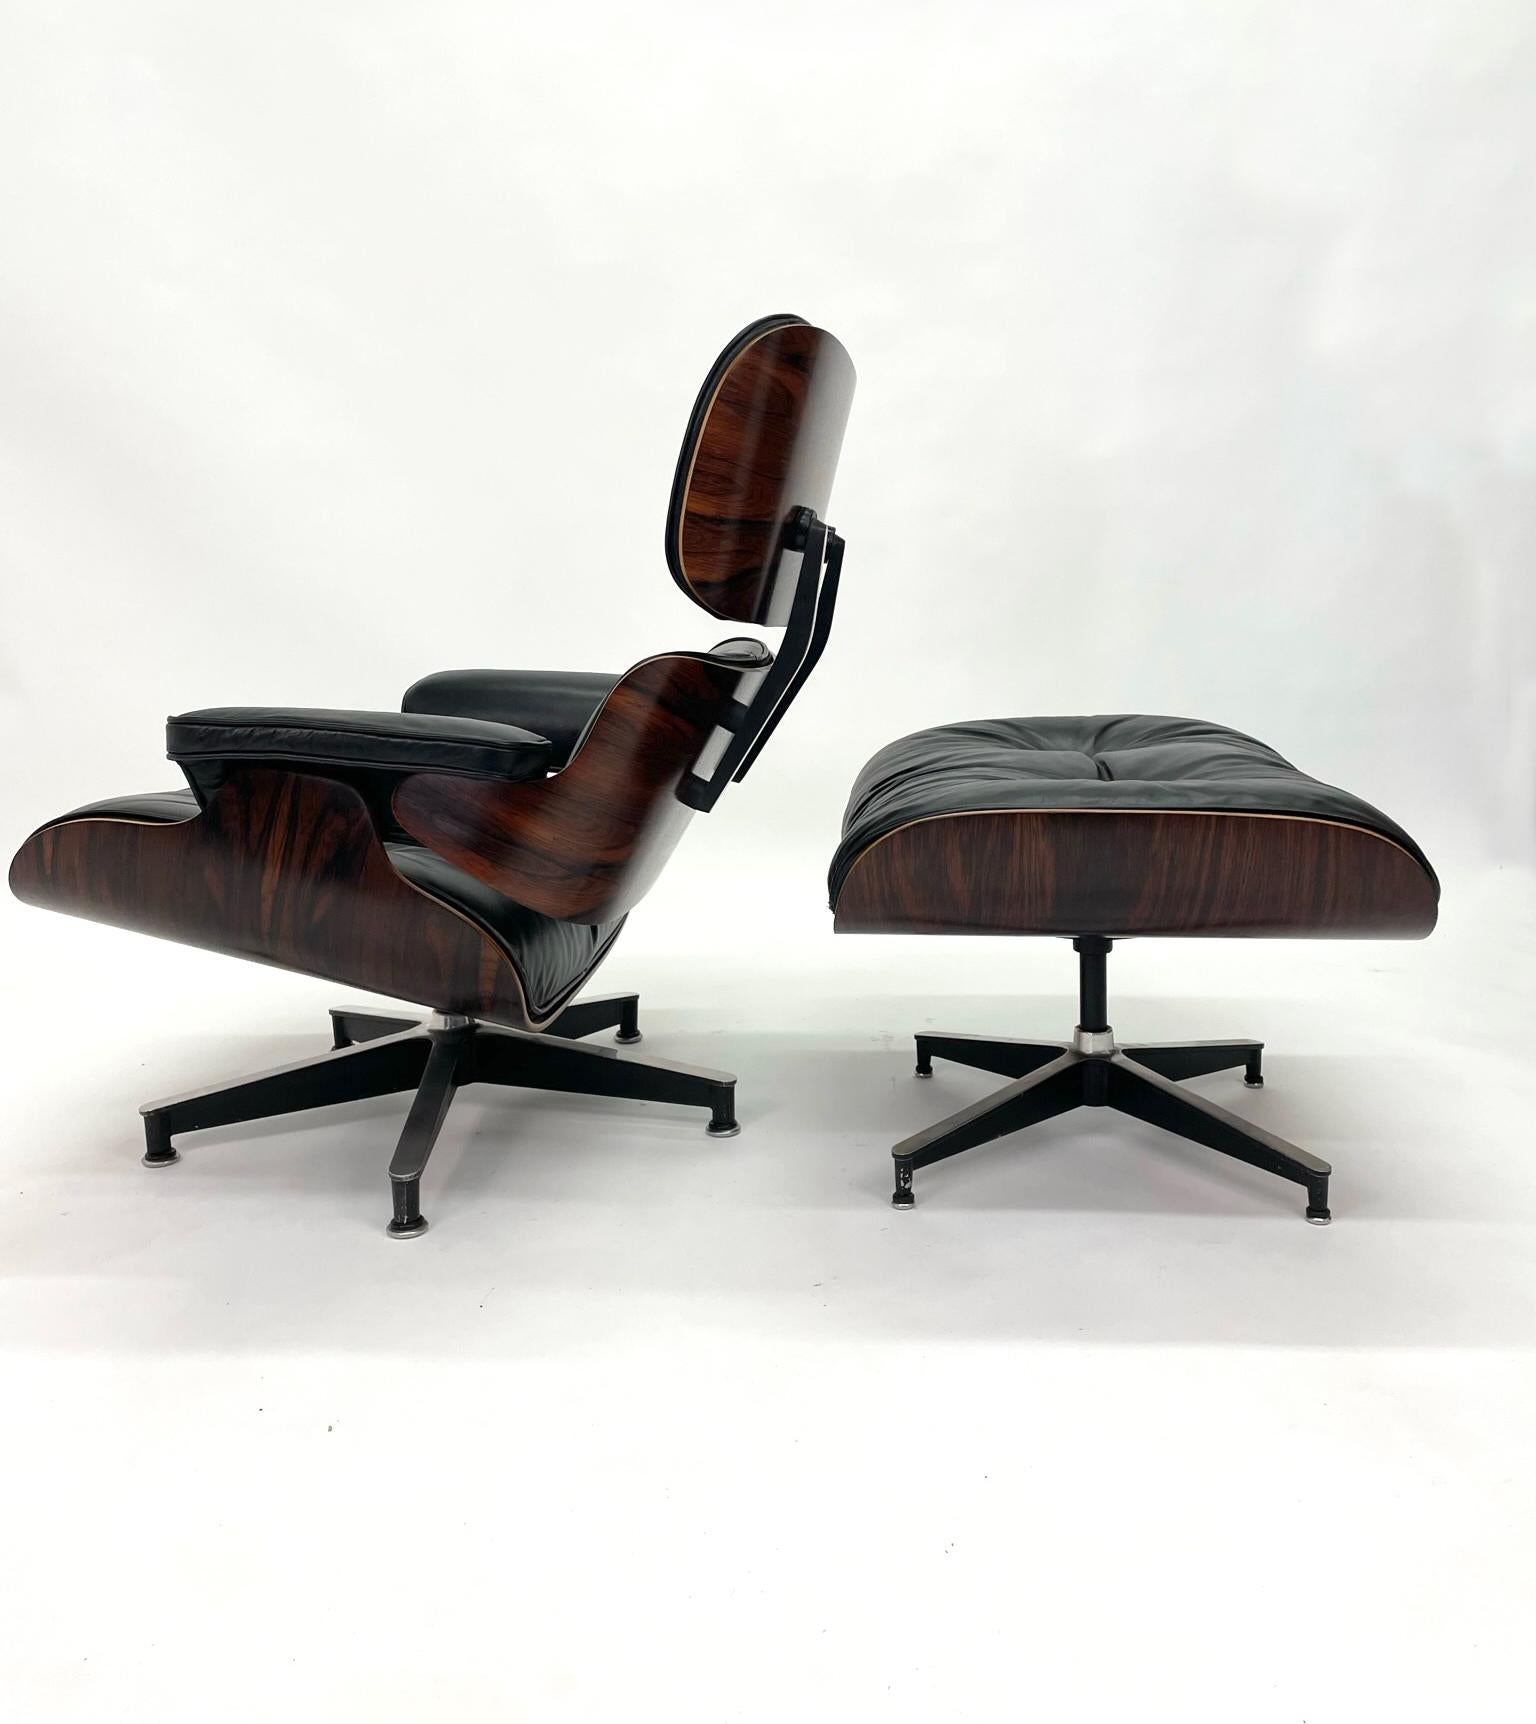 North American 2nd Generation Eames Lounge Chair & Ottoman in Brazilian Rosewood